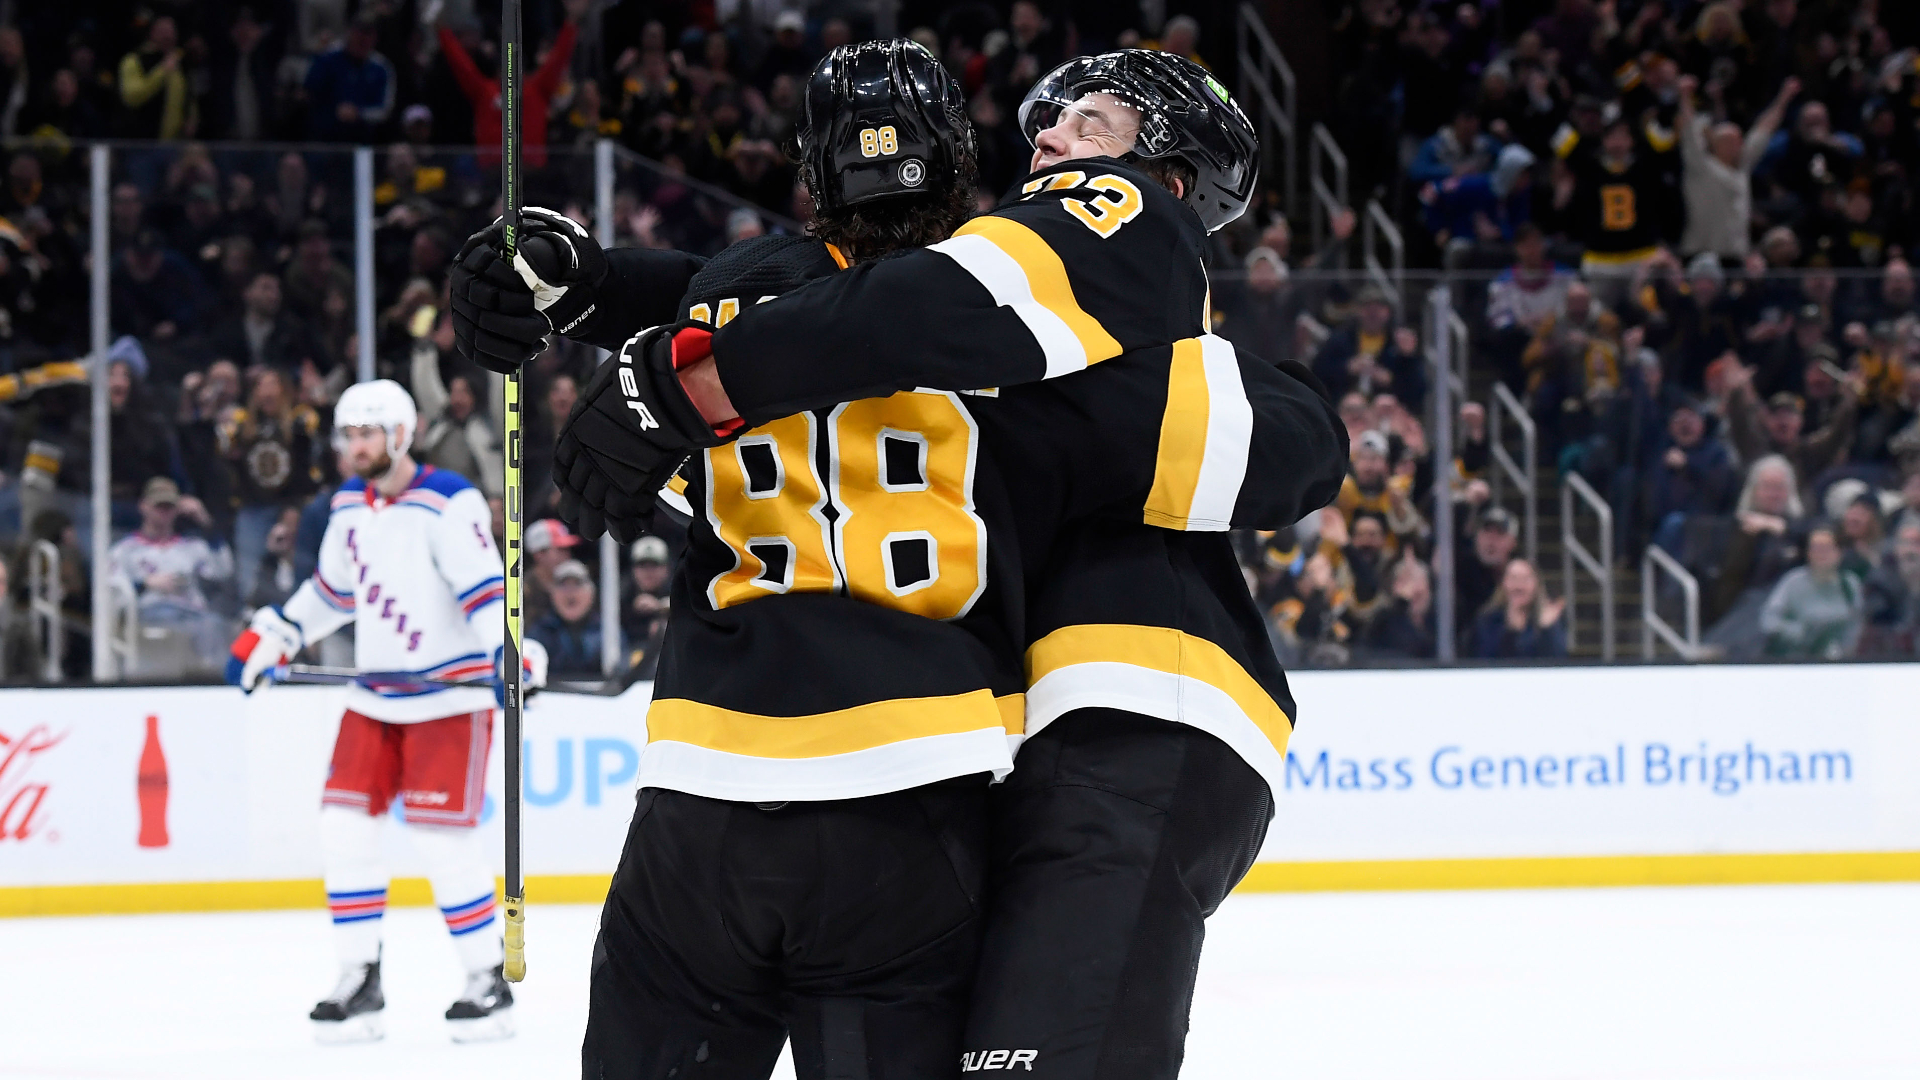 Pastrnak irked by absence of Czech players in NHL tournament